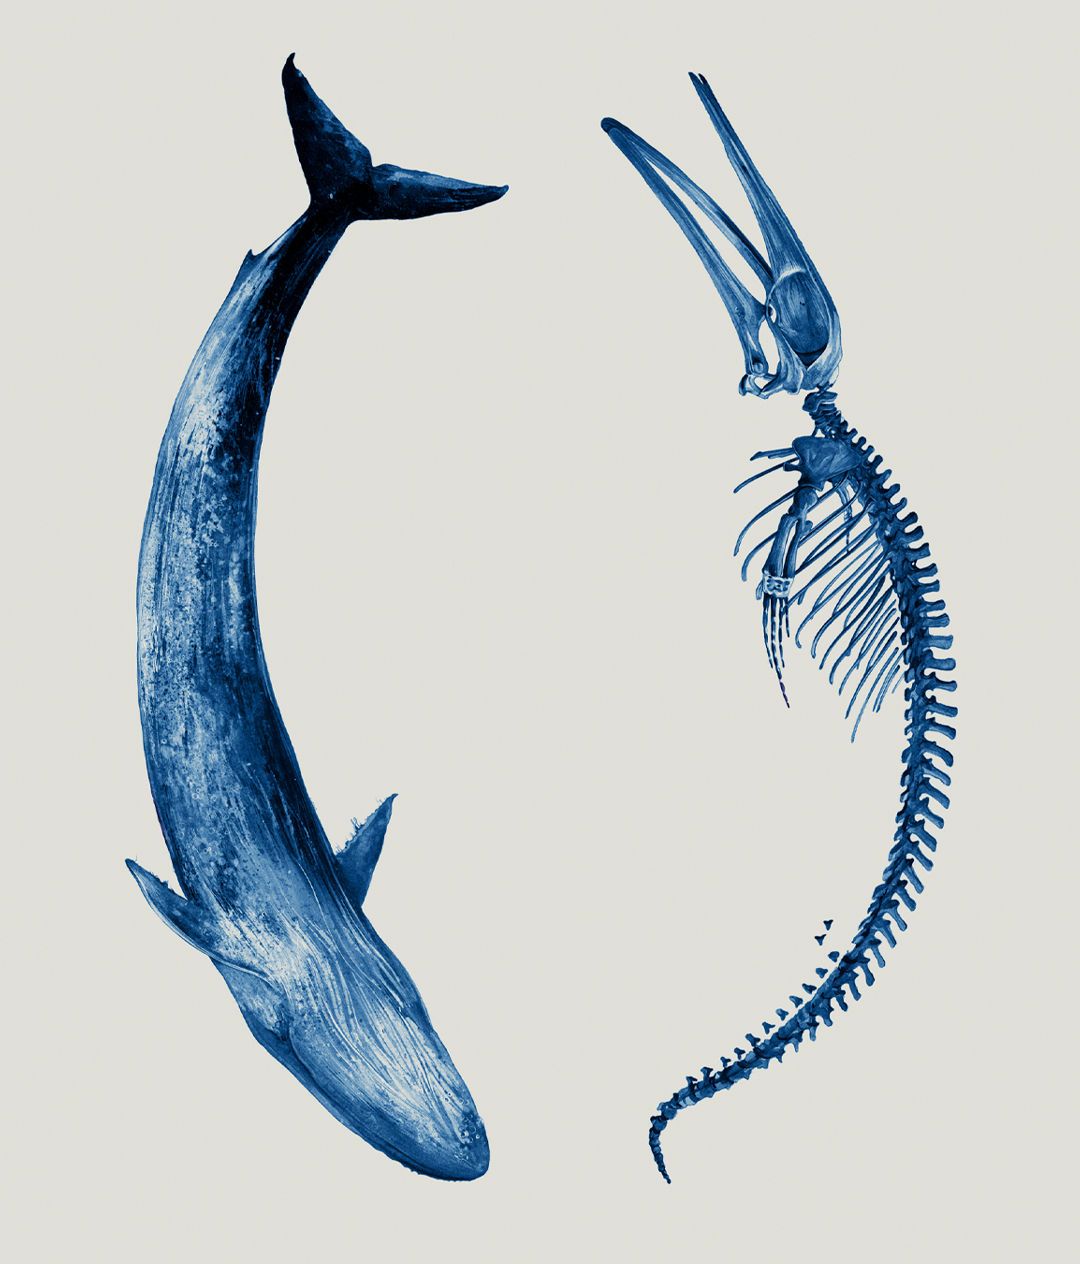 A Blue Whale and a Blue Whale's skeleton